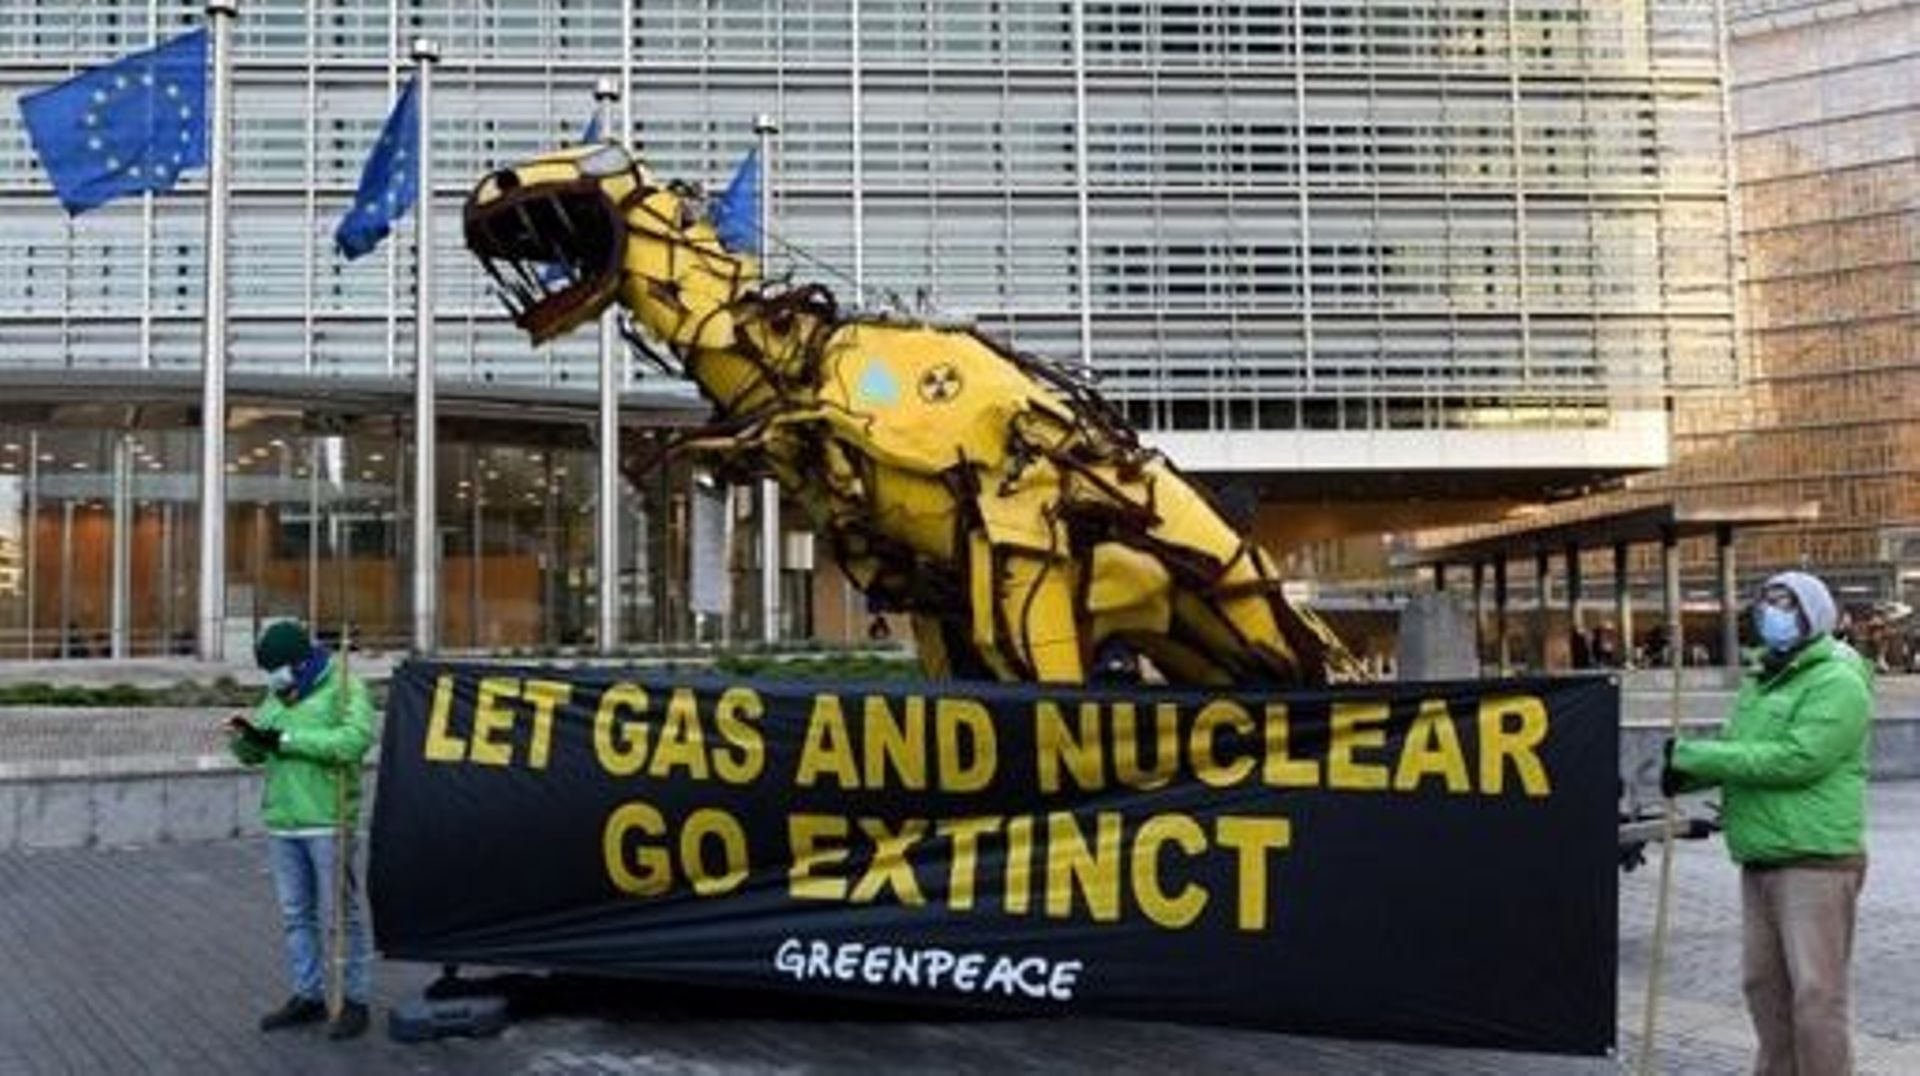 A statue depicting a giant dinosaur painted with radioactive symbols and blue gas flames is displayed by Greenpeace activists outside the European Commission headquarters in Brussels, in protest against the inclusion of fossil gas and nuclear energy in th